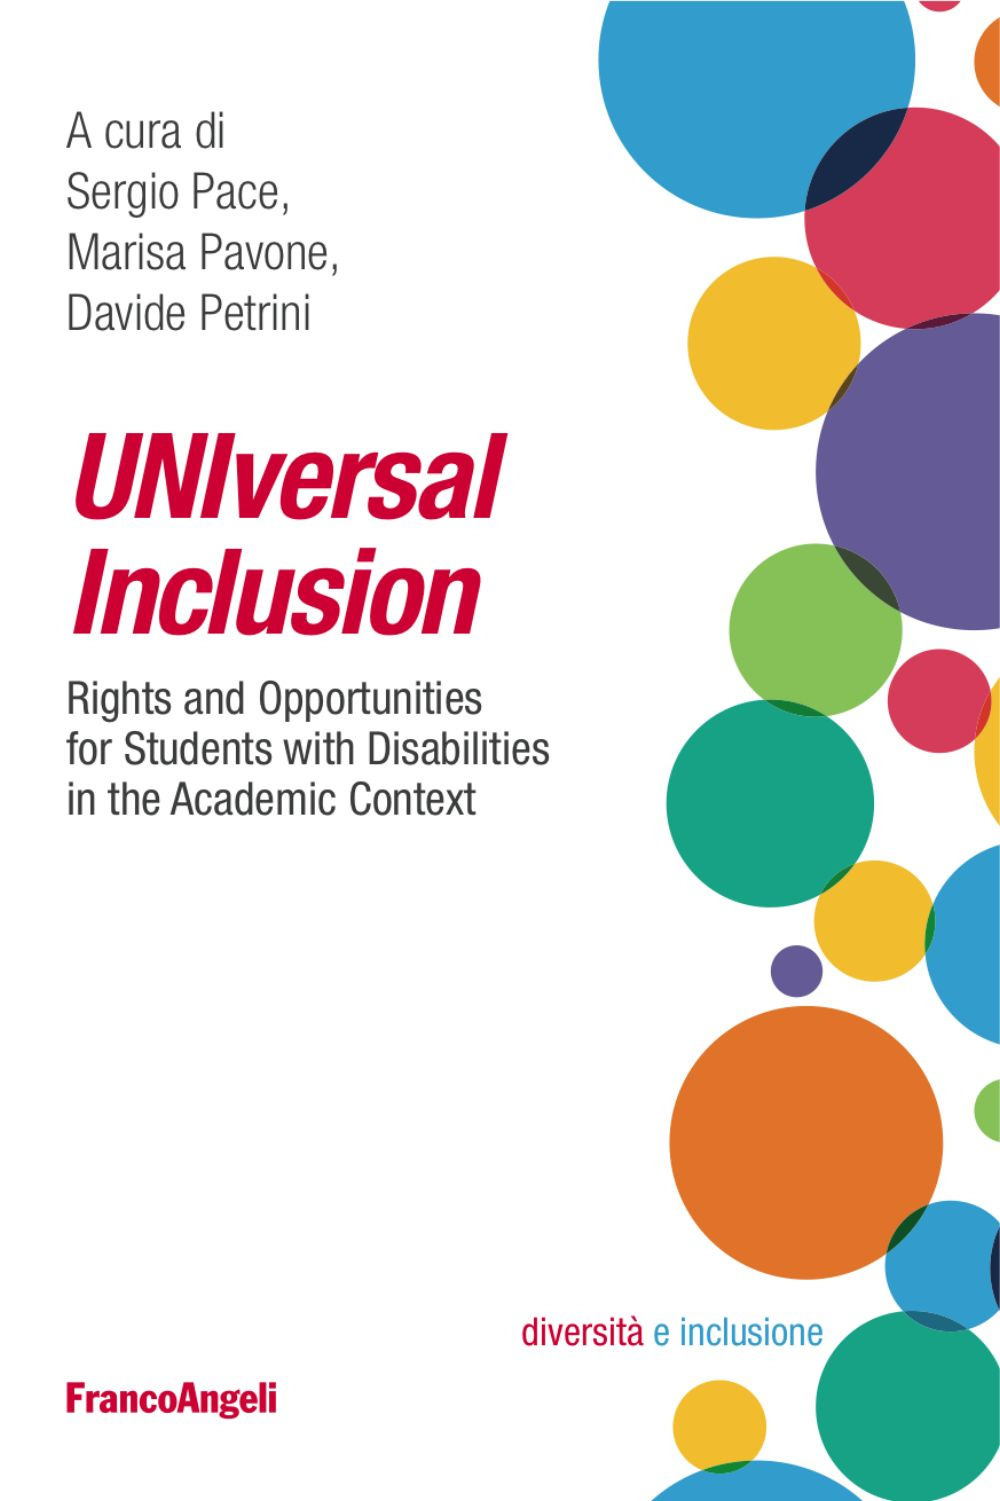 Image of UNIversal inclusion. Rights and opportunities for students with disabilities in the academic context